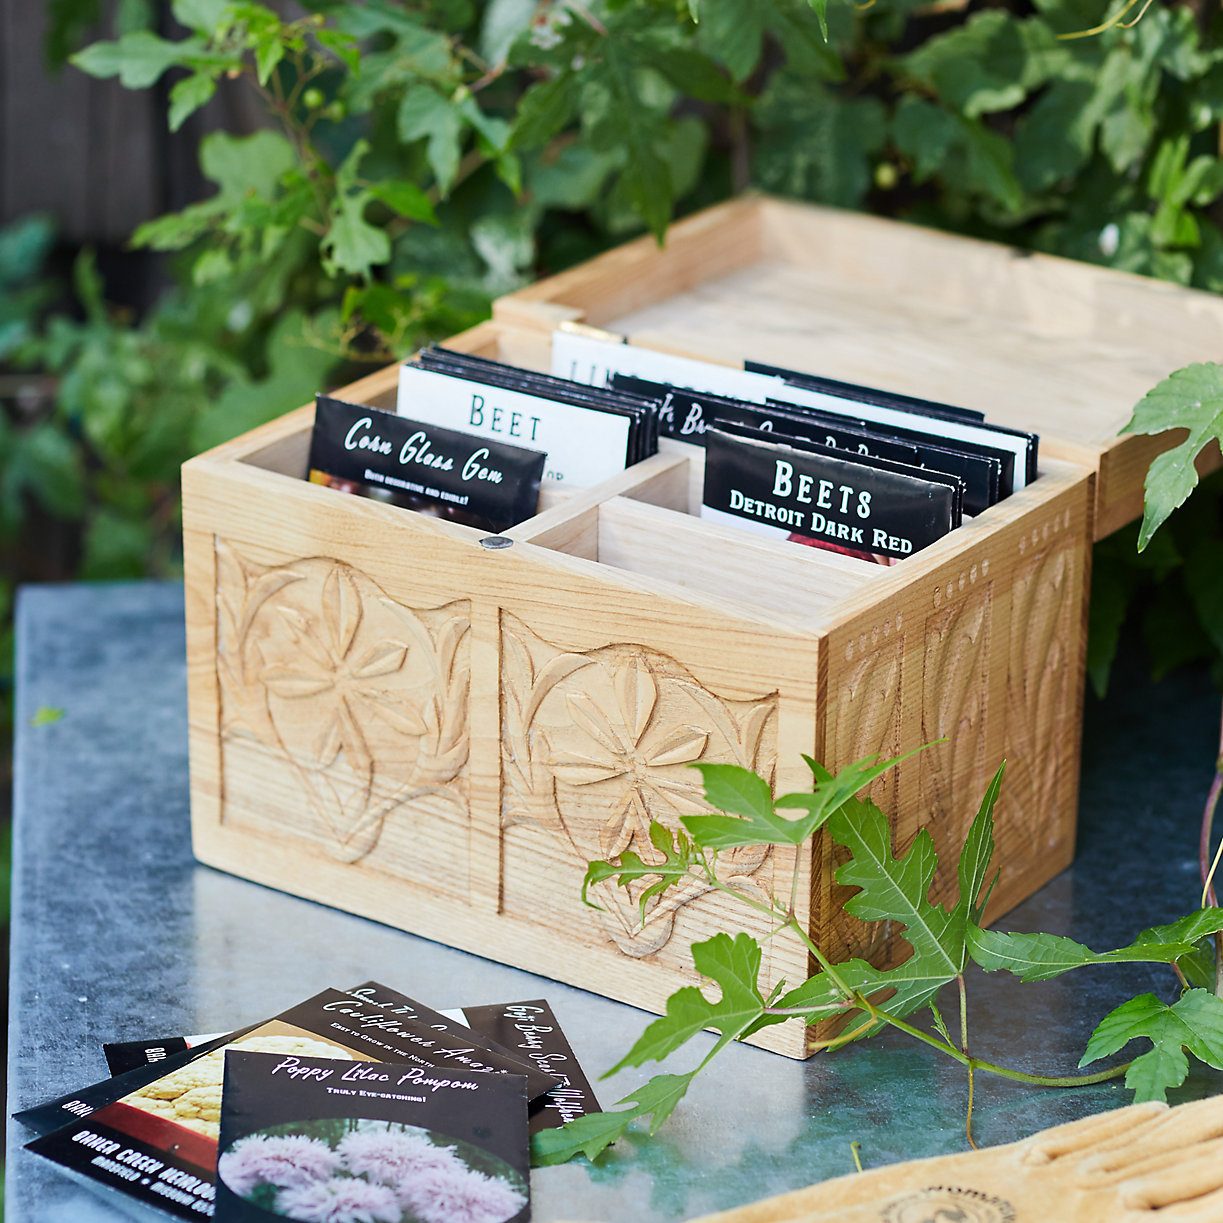 7 Best Seed Storage Containers and Boxes